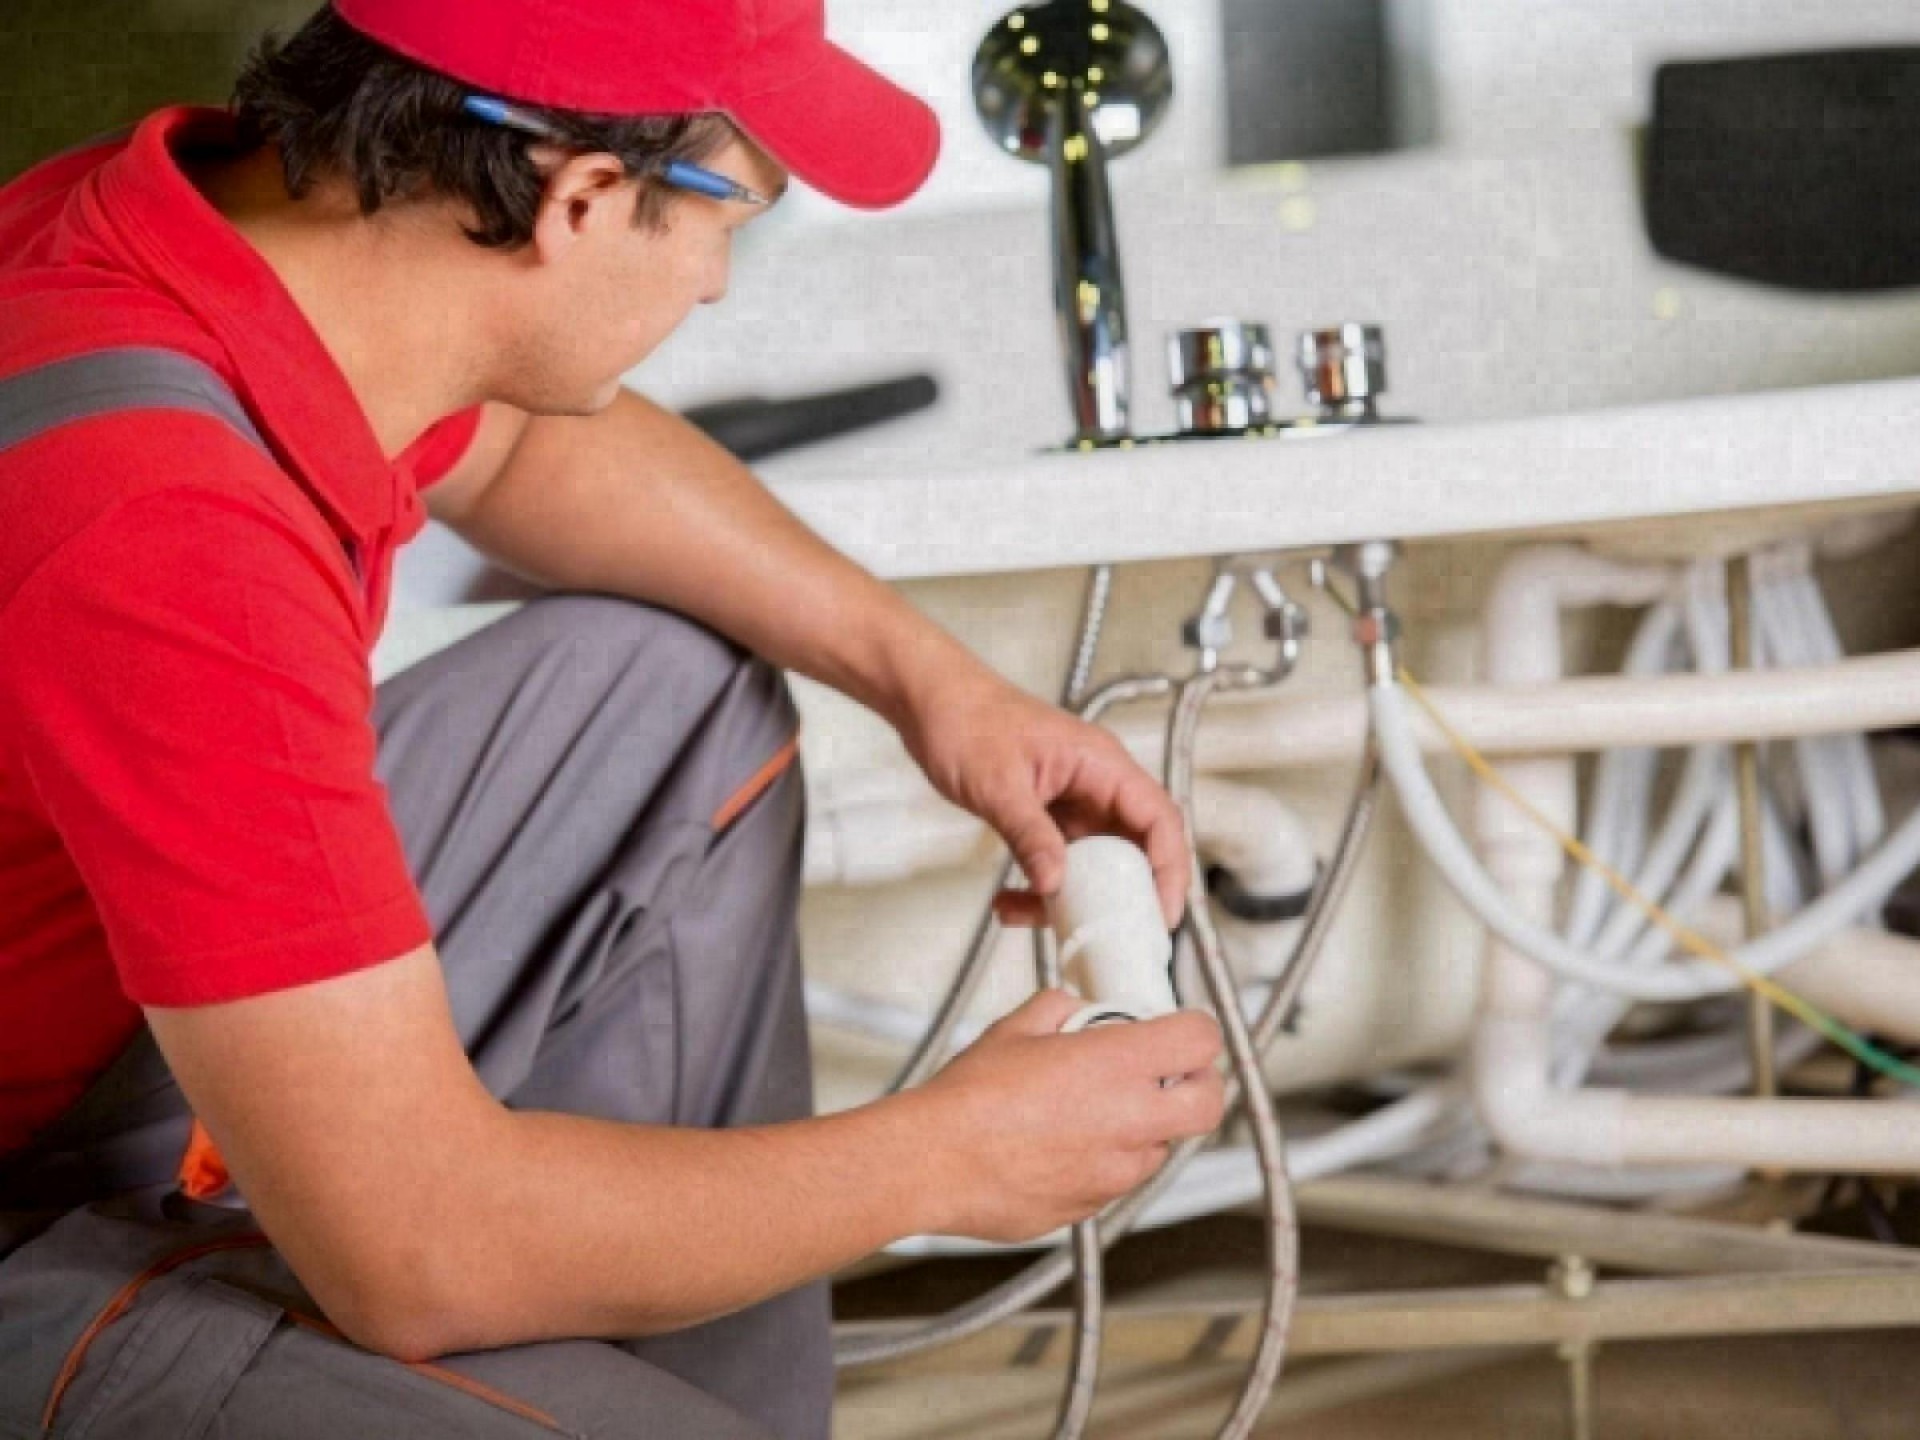 Commercial and Domestic Plumbing Business...Business For Sale